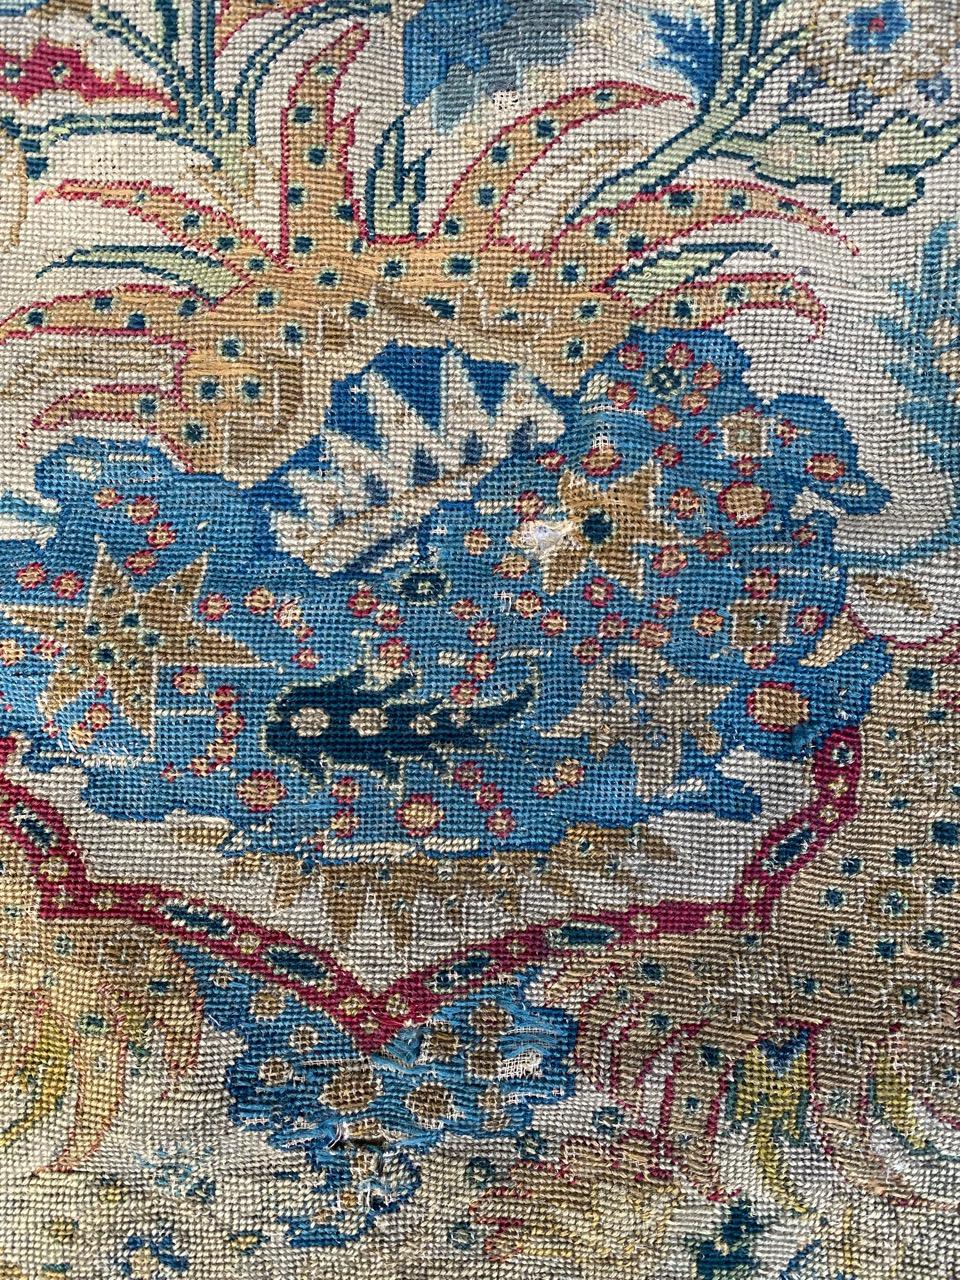 Nice little French needlepoint tapestry with beautiful floral design and nice natural colors, entirely hand embroidered with needlepoint method with wool.

✨✨✨
